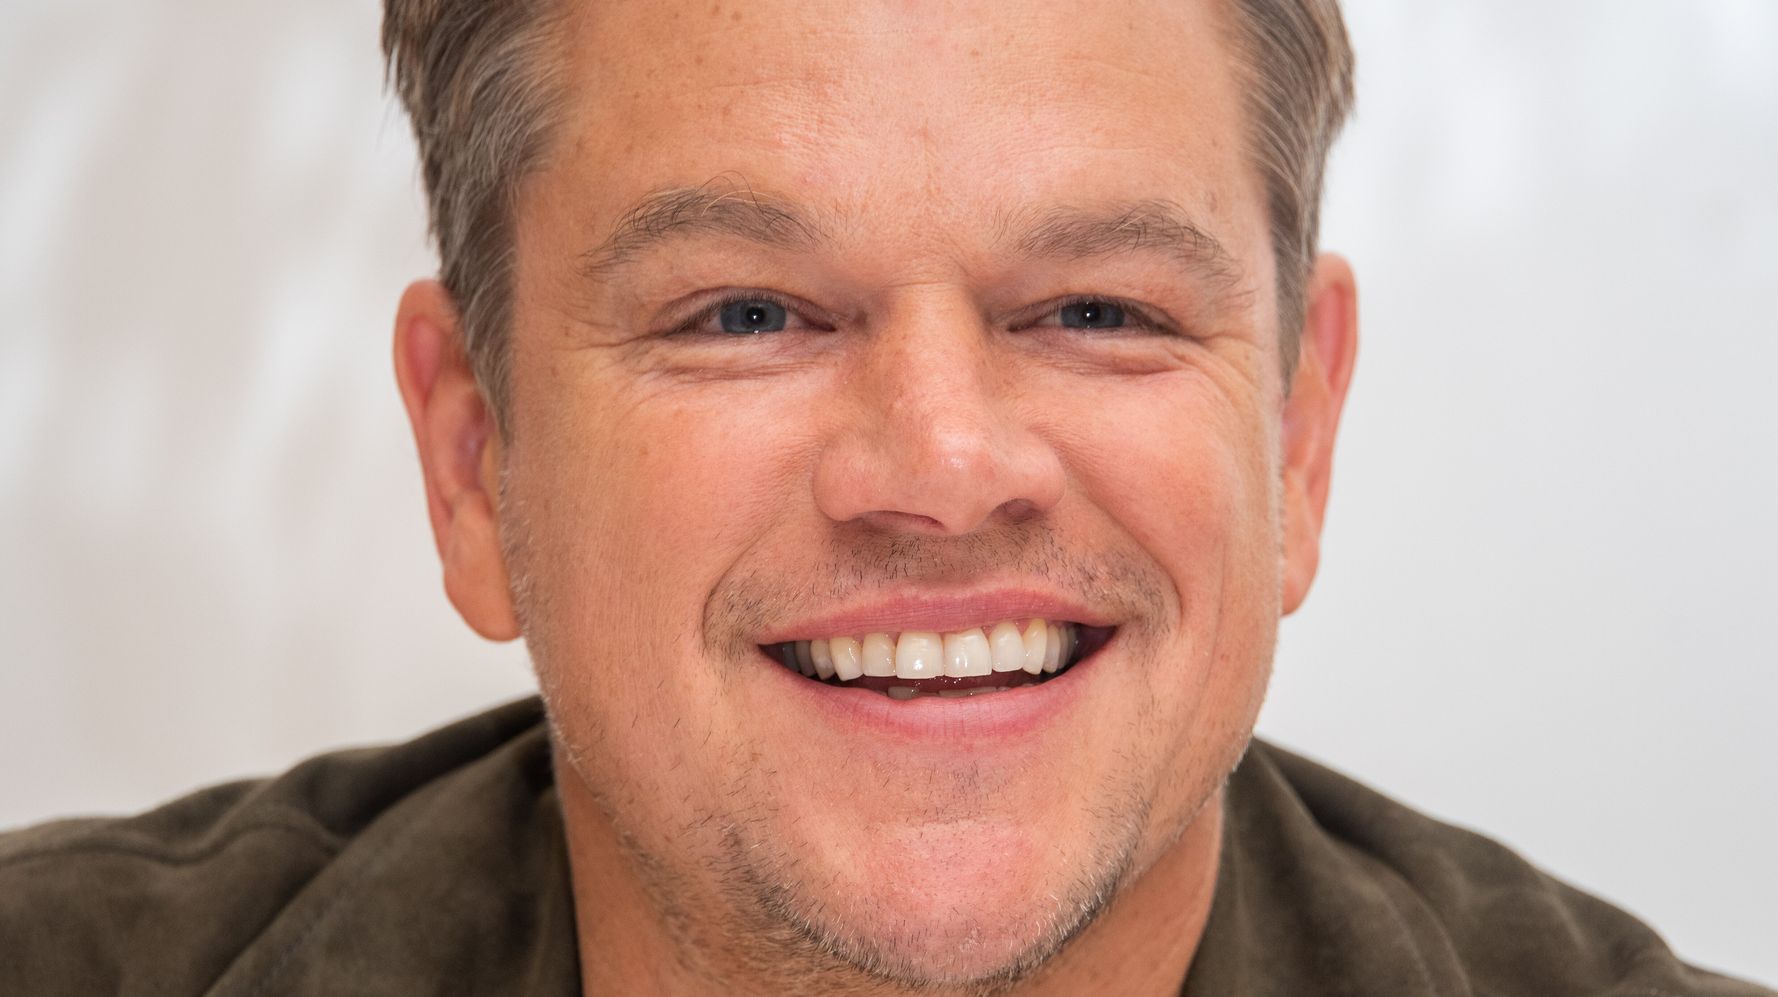 Matt Damon’s Daughter Won’t Watch ‘Good Will Hunting’ For One Very Teenager-y Reason